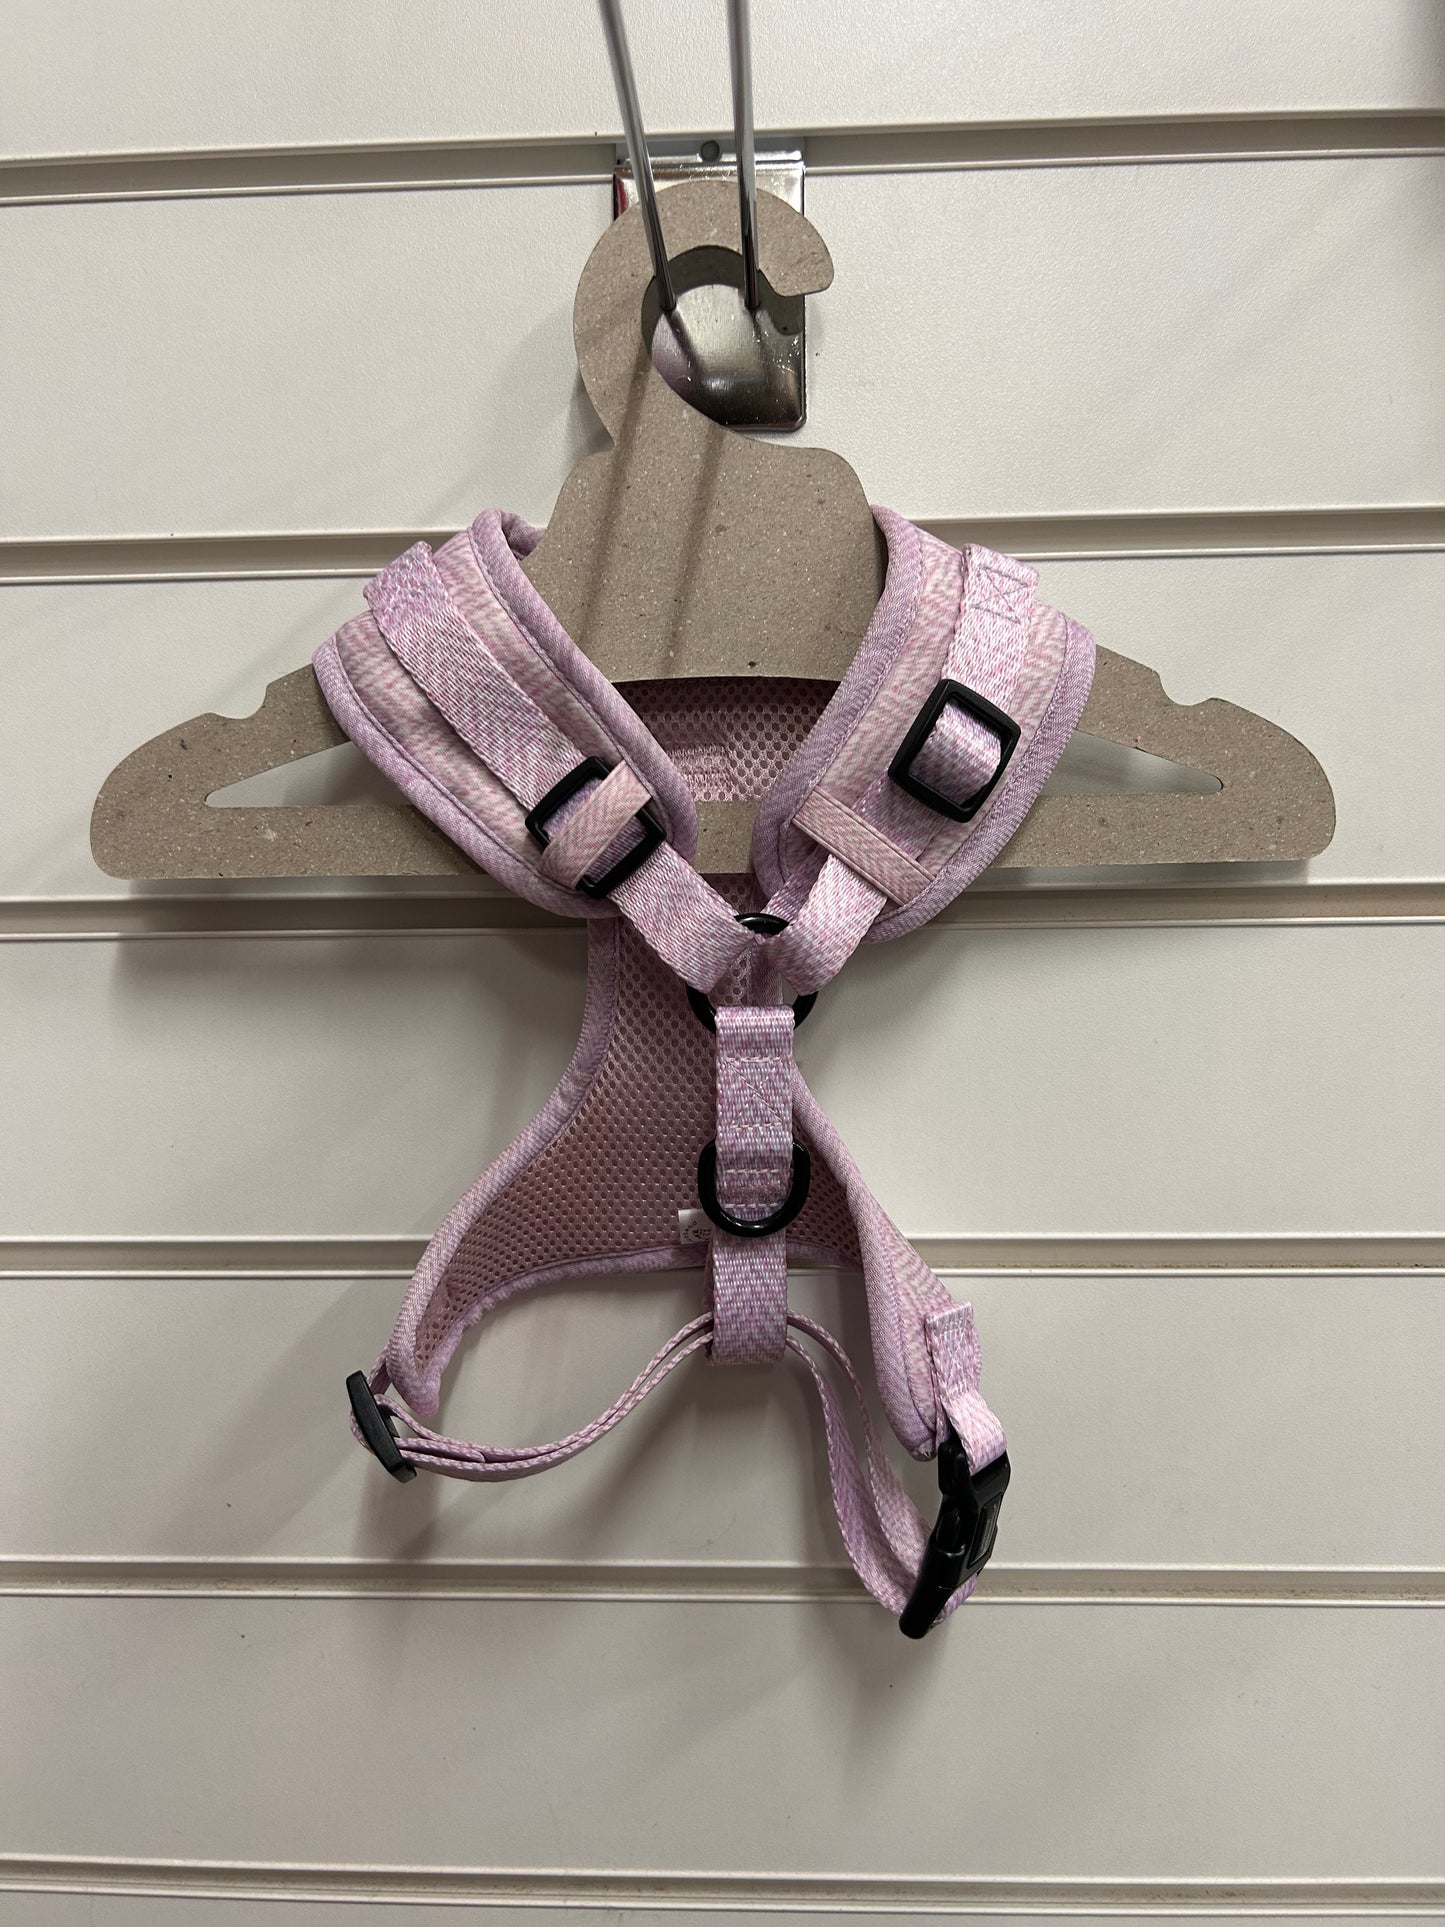 Pawsome Paws Boutique Country Rose Adjustable Harness